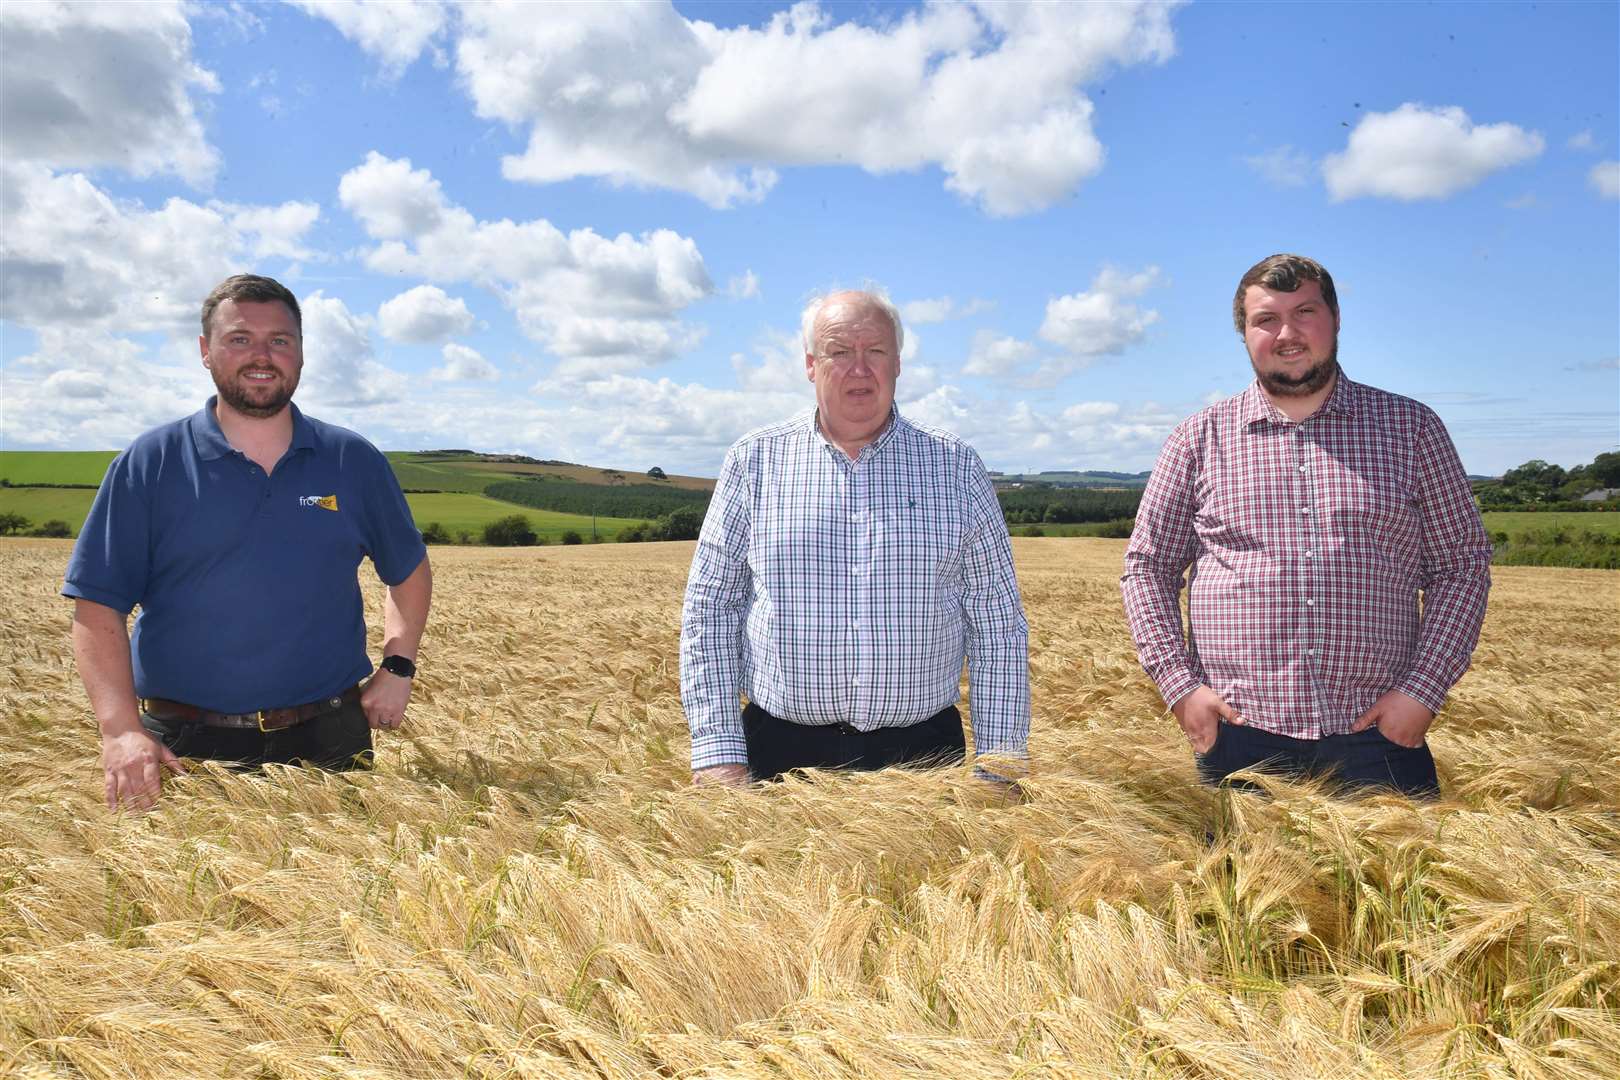 Steven Penrice from Frontier Agriculture with, David and Andrew Murphy in the prizewinning field of winter barley.